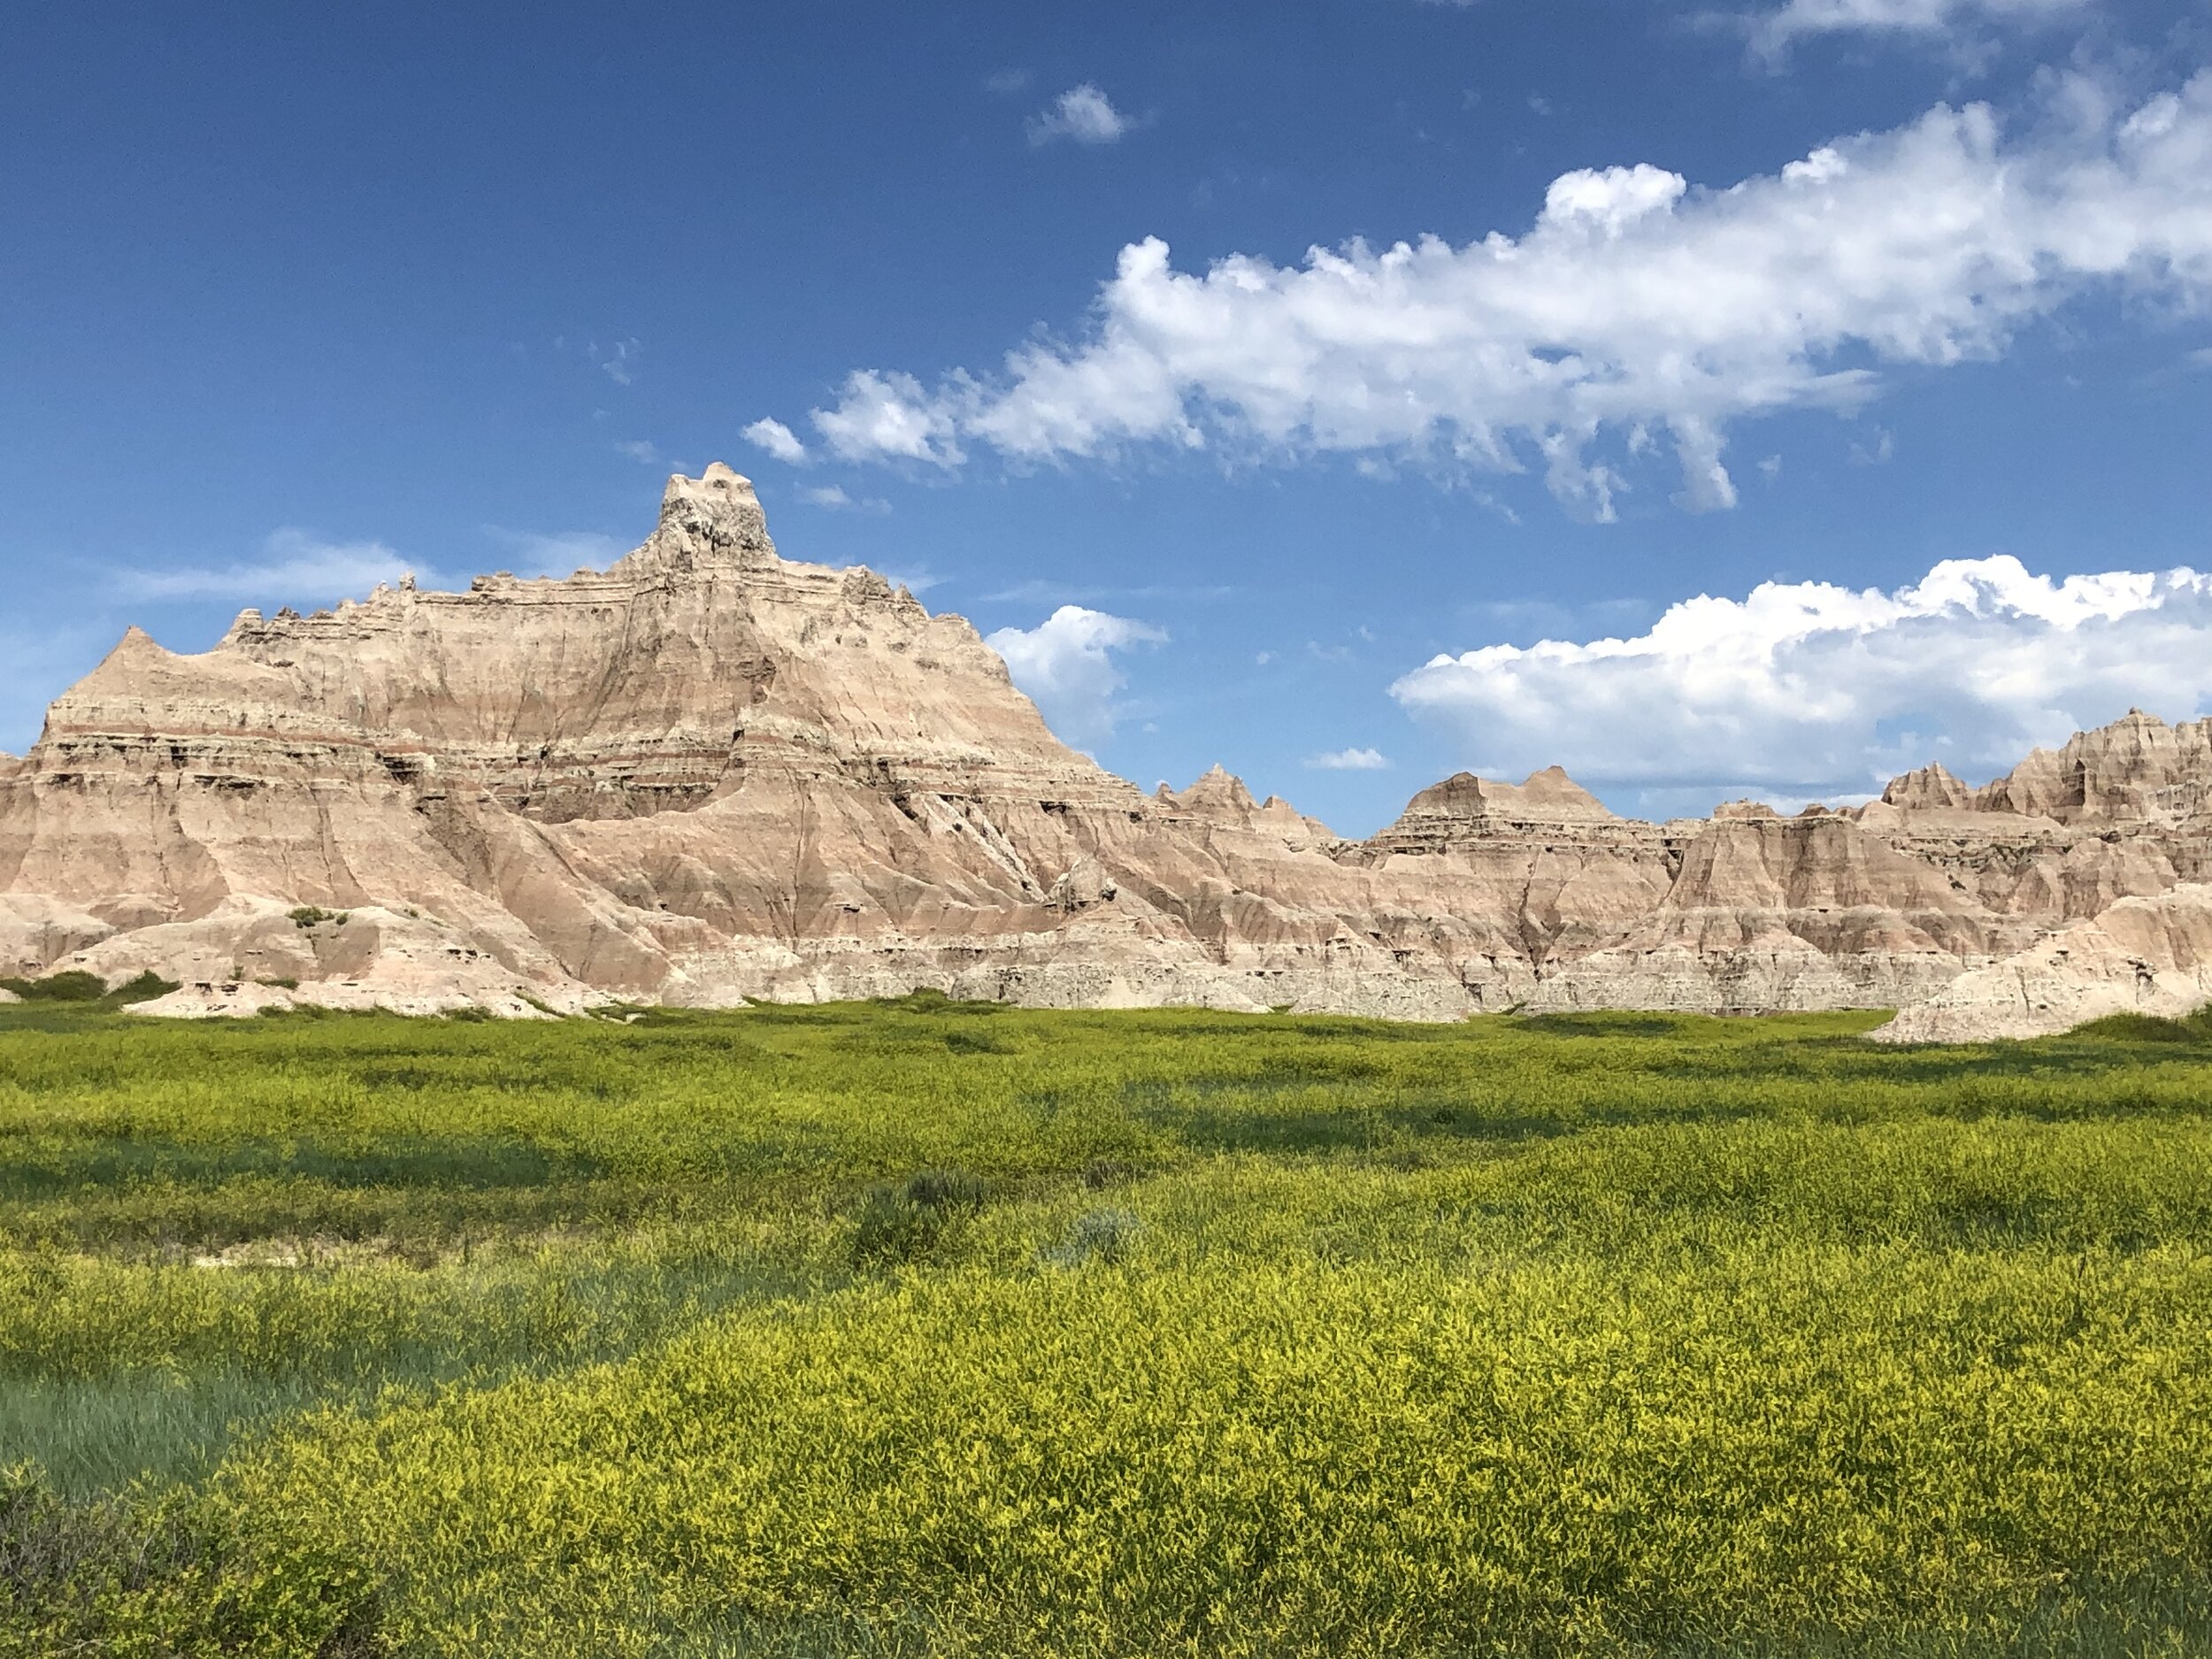 The banded landforms of Badlands National Park are manifestations of the layers of shale, sandstone, volcanic ash, ancient soils, and siltstone that have been deposited here.